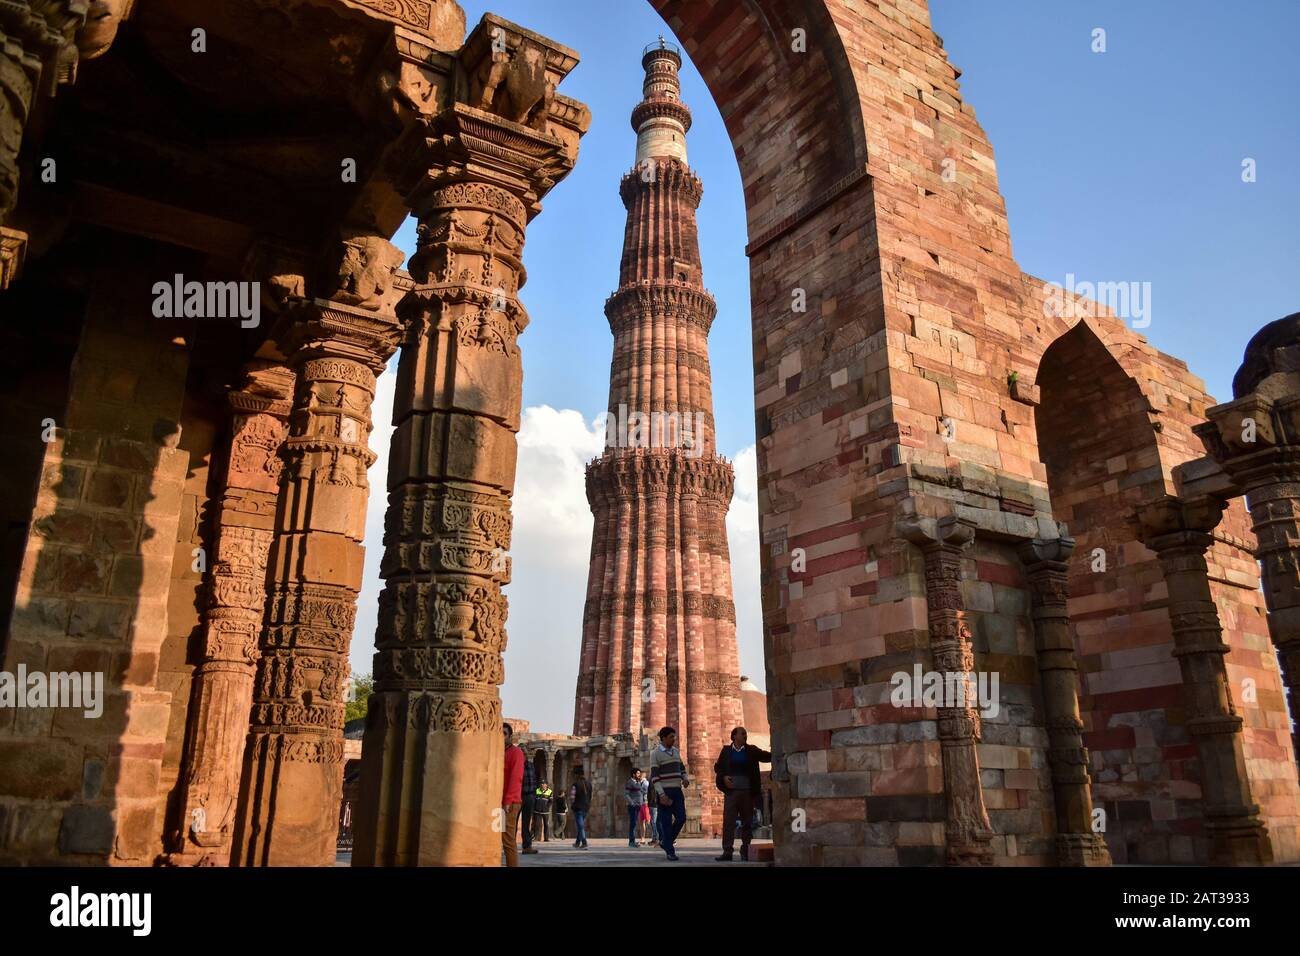 Visitors walk around the historic Qutub Minar in Delhi.Qutub Minar, a UNESCO World Heritage Site, is the tallest minaret in India. The Qutub Minar was built in the early 13th century a few kilometers south of Delhi. Stock Photo